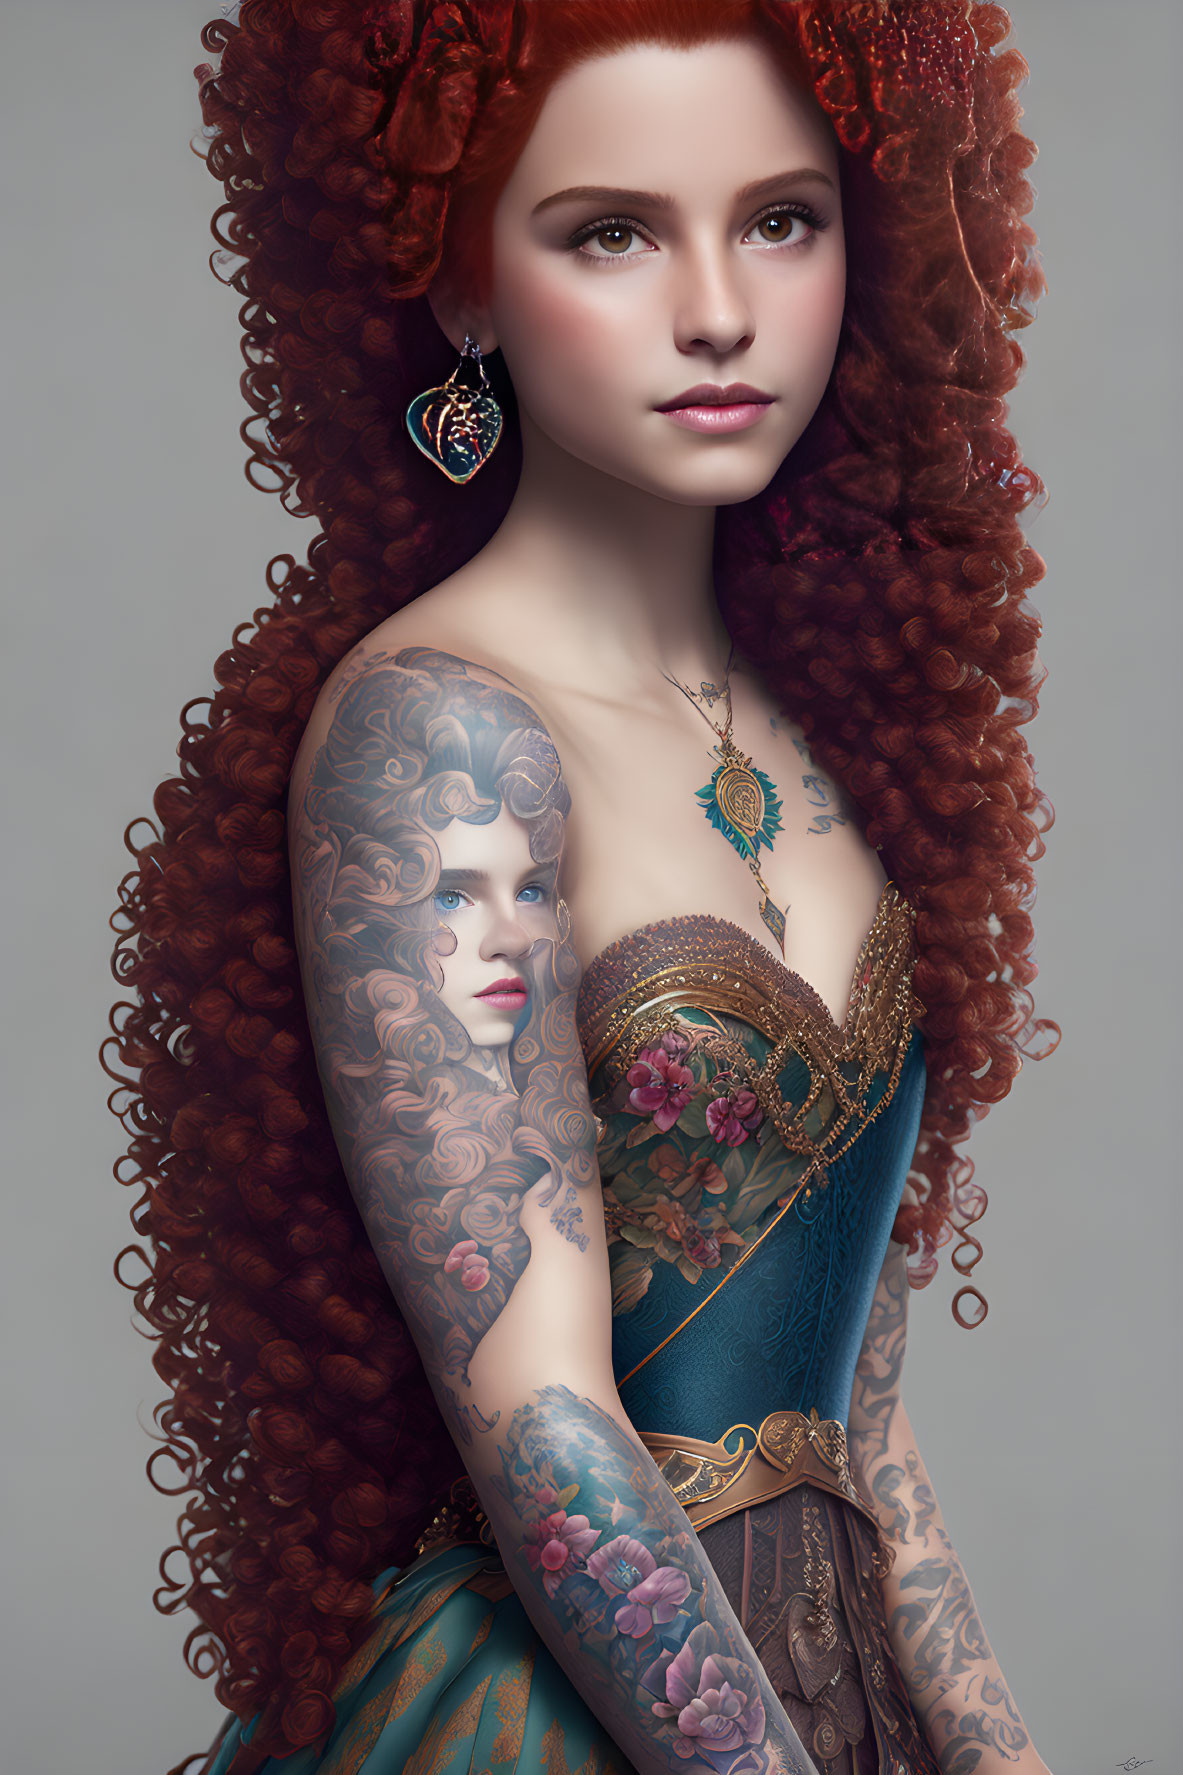 Digital artwork featuring woman with voluminous red curly hair, tattoos, teal and gold dress